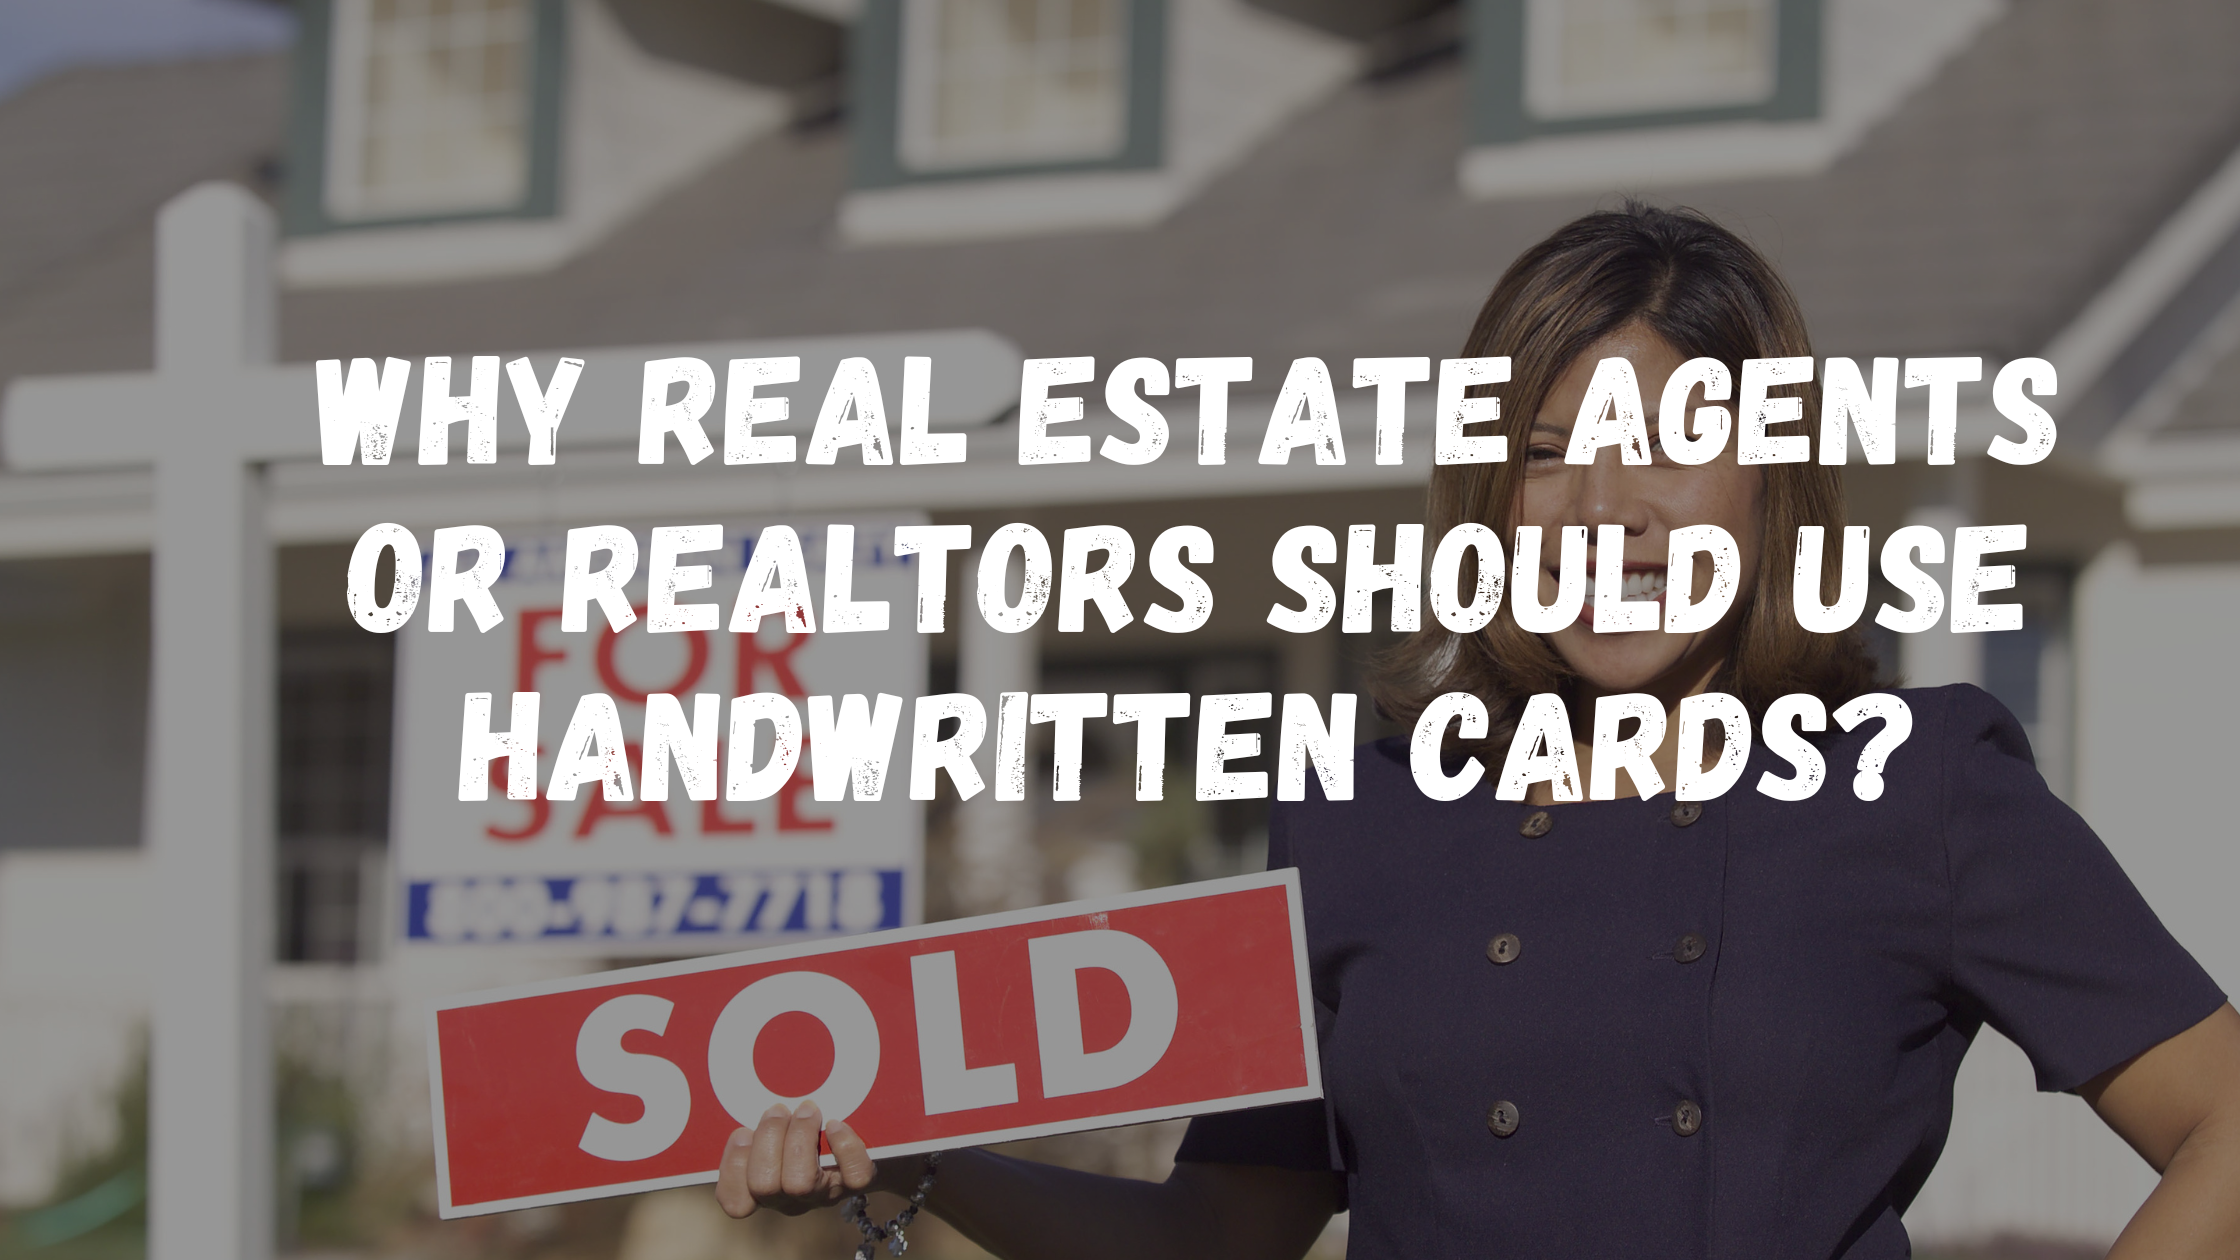 Why Real Estate Agents or Realtors Should Use Handwritten Cards?